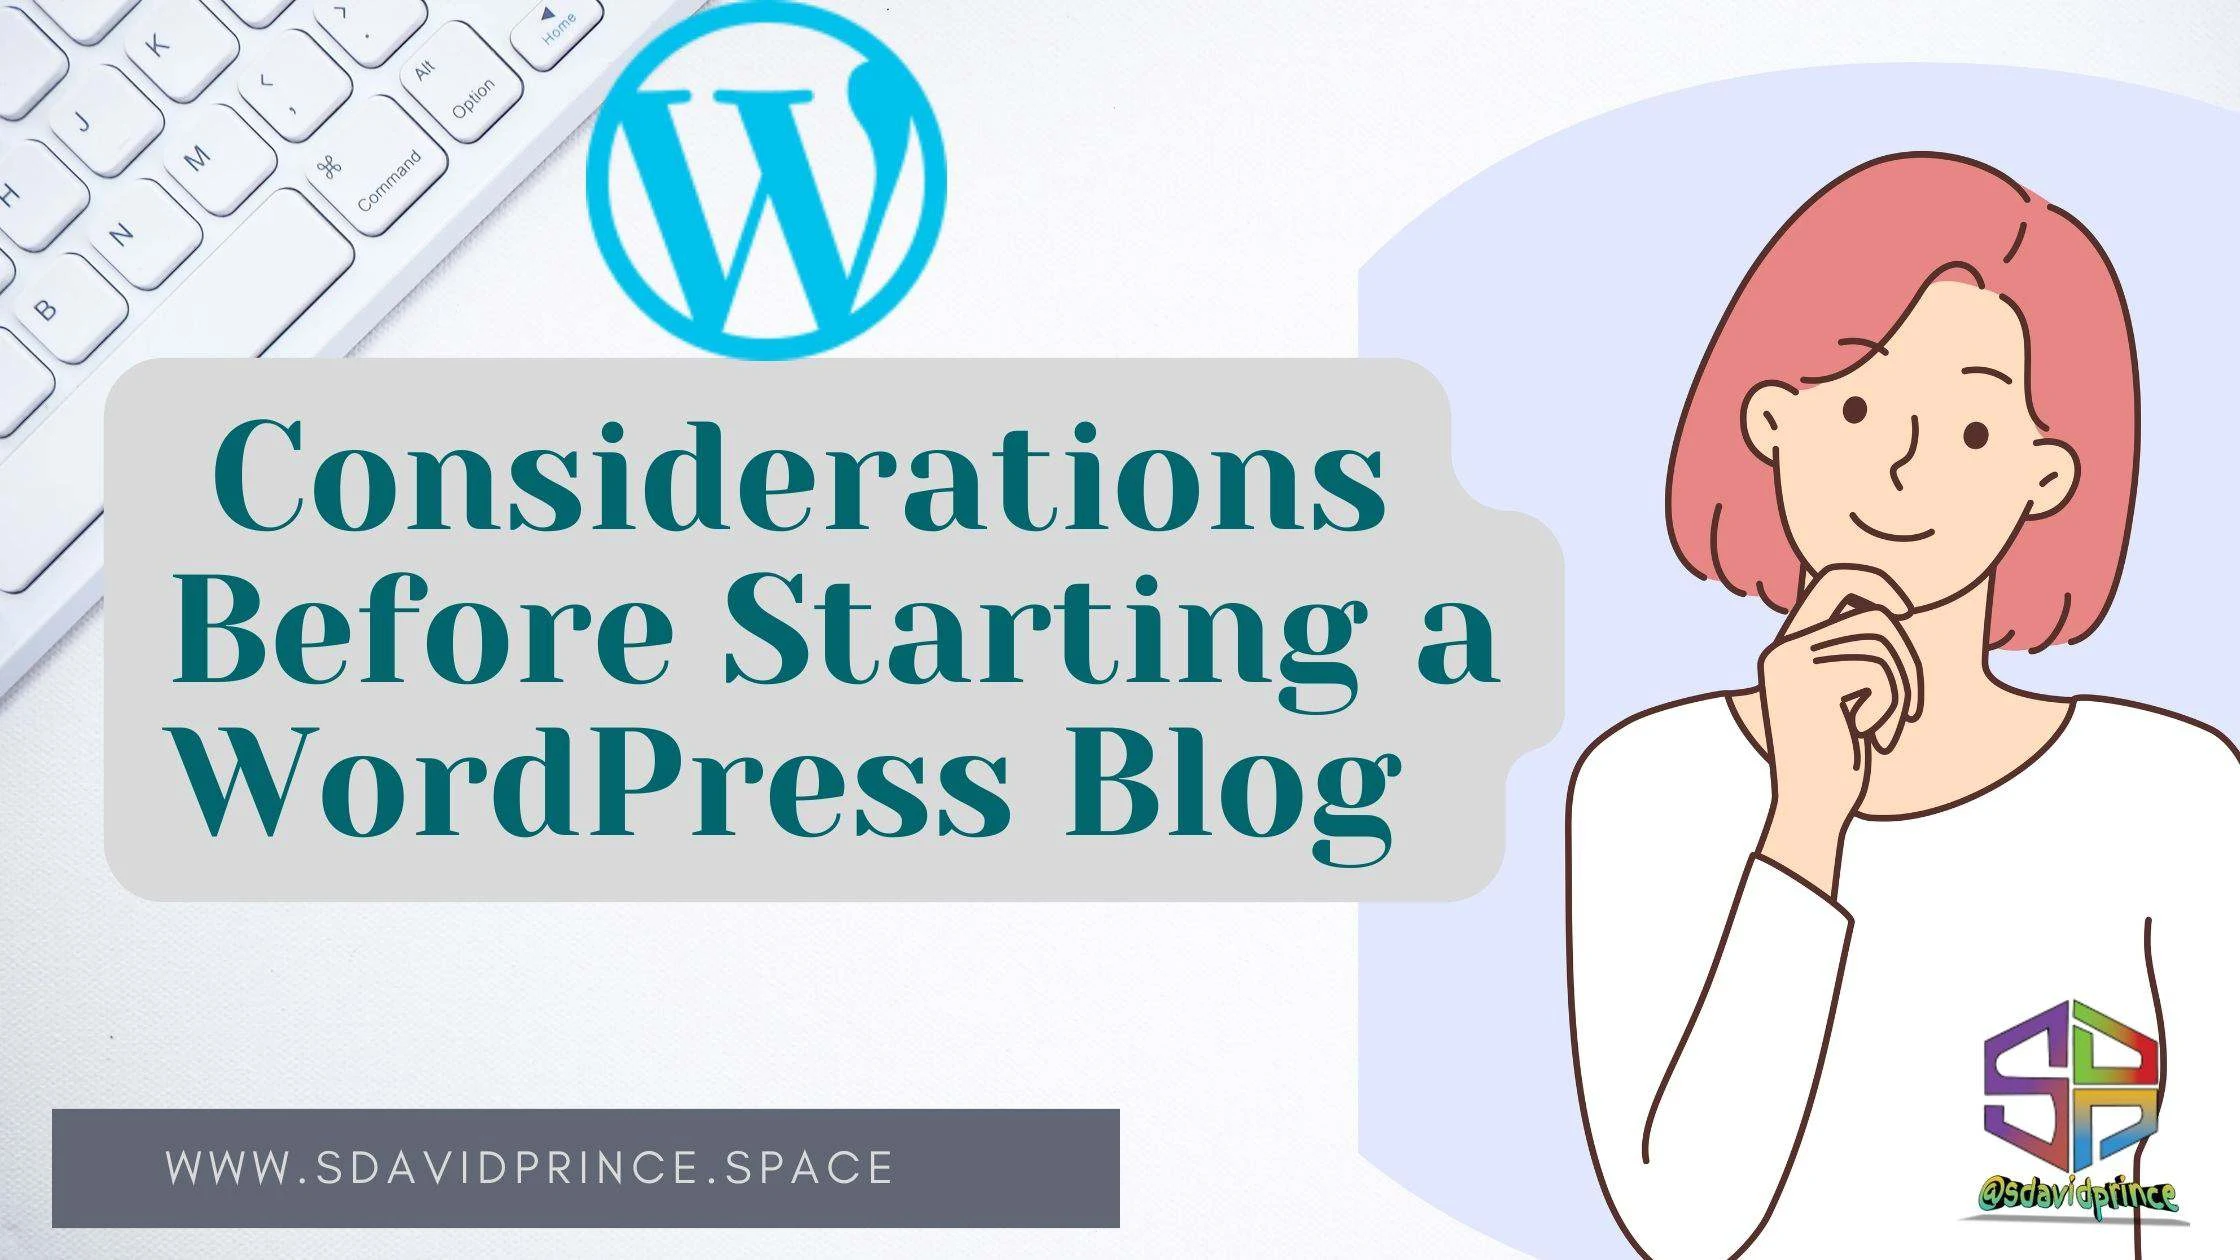 What to consider before starting a blog on wordpress